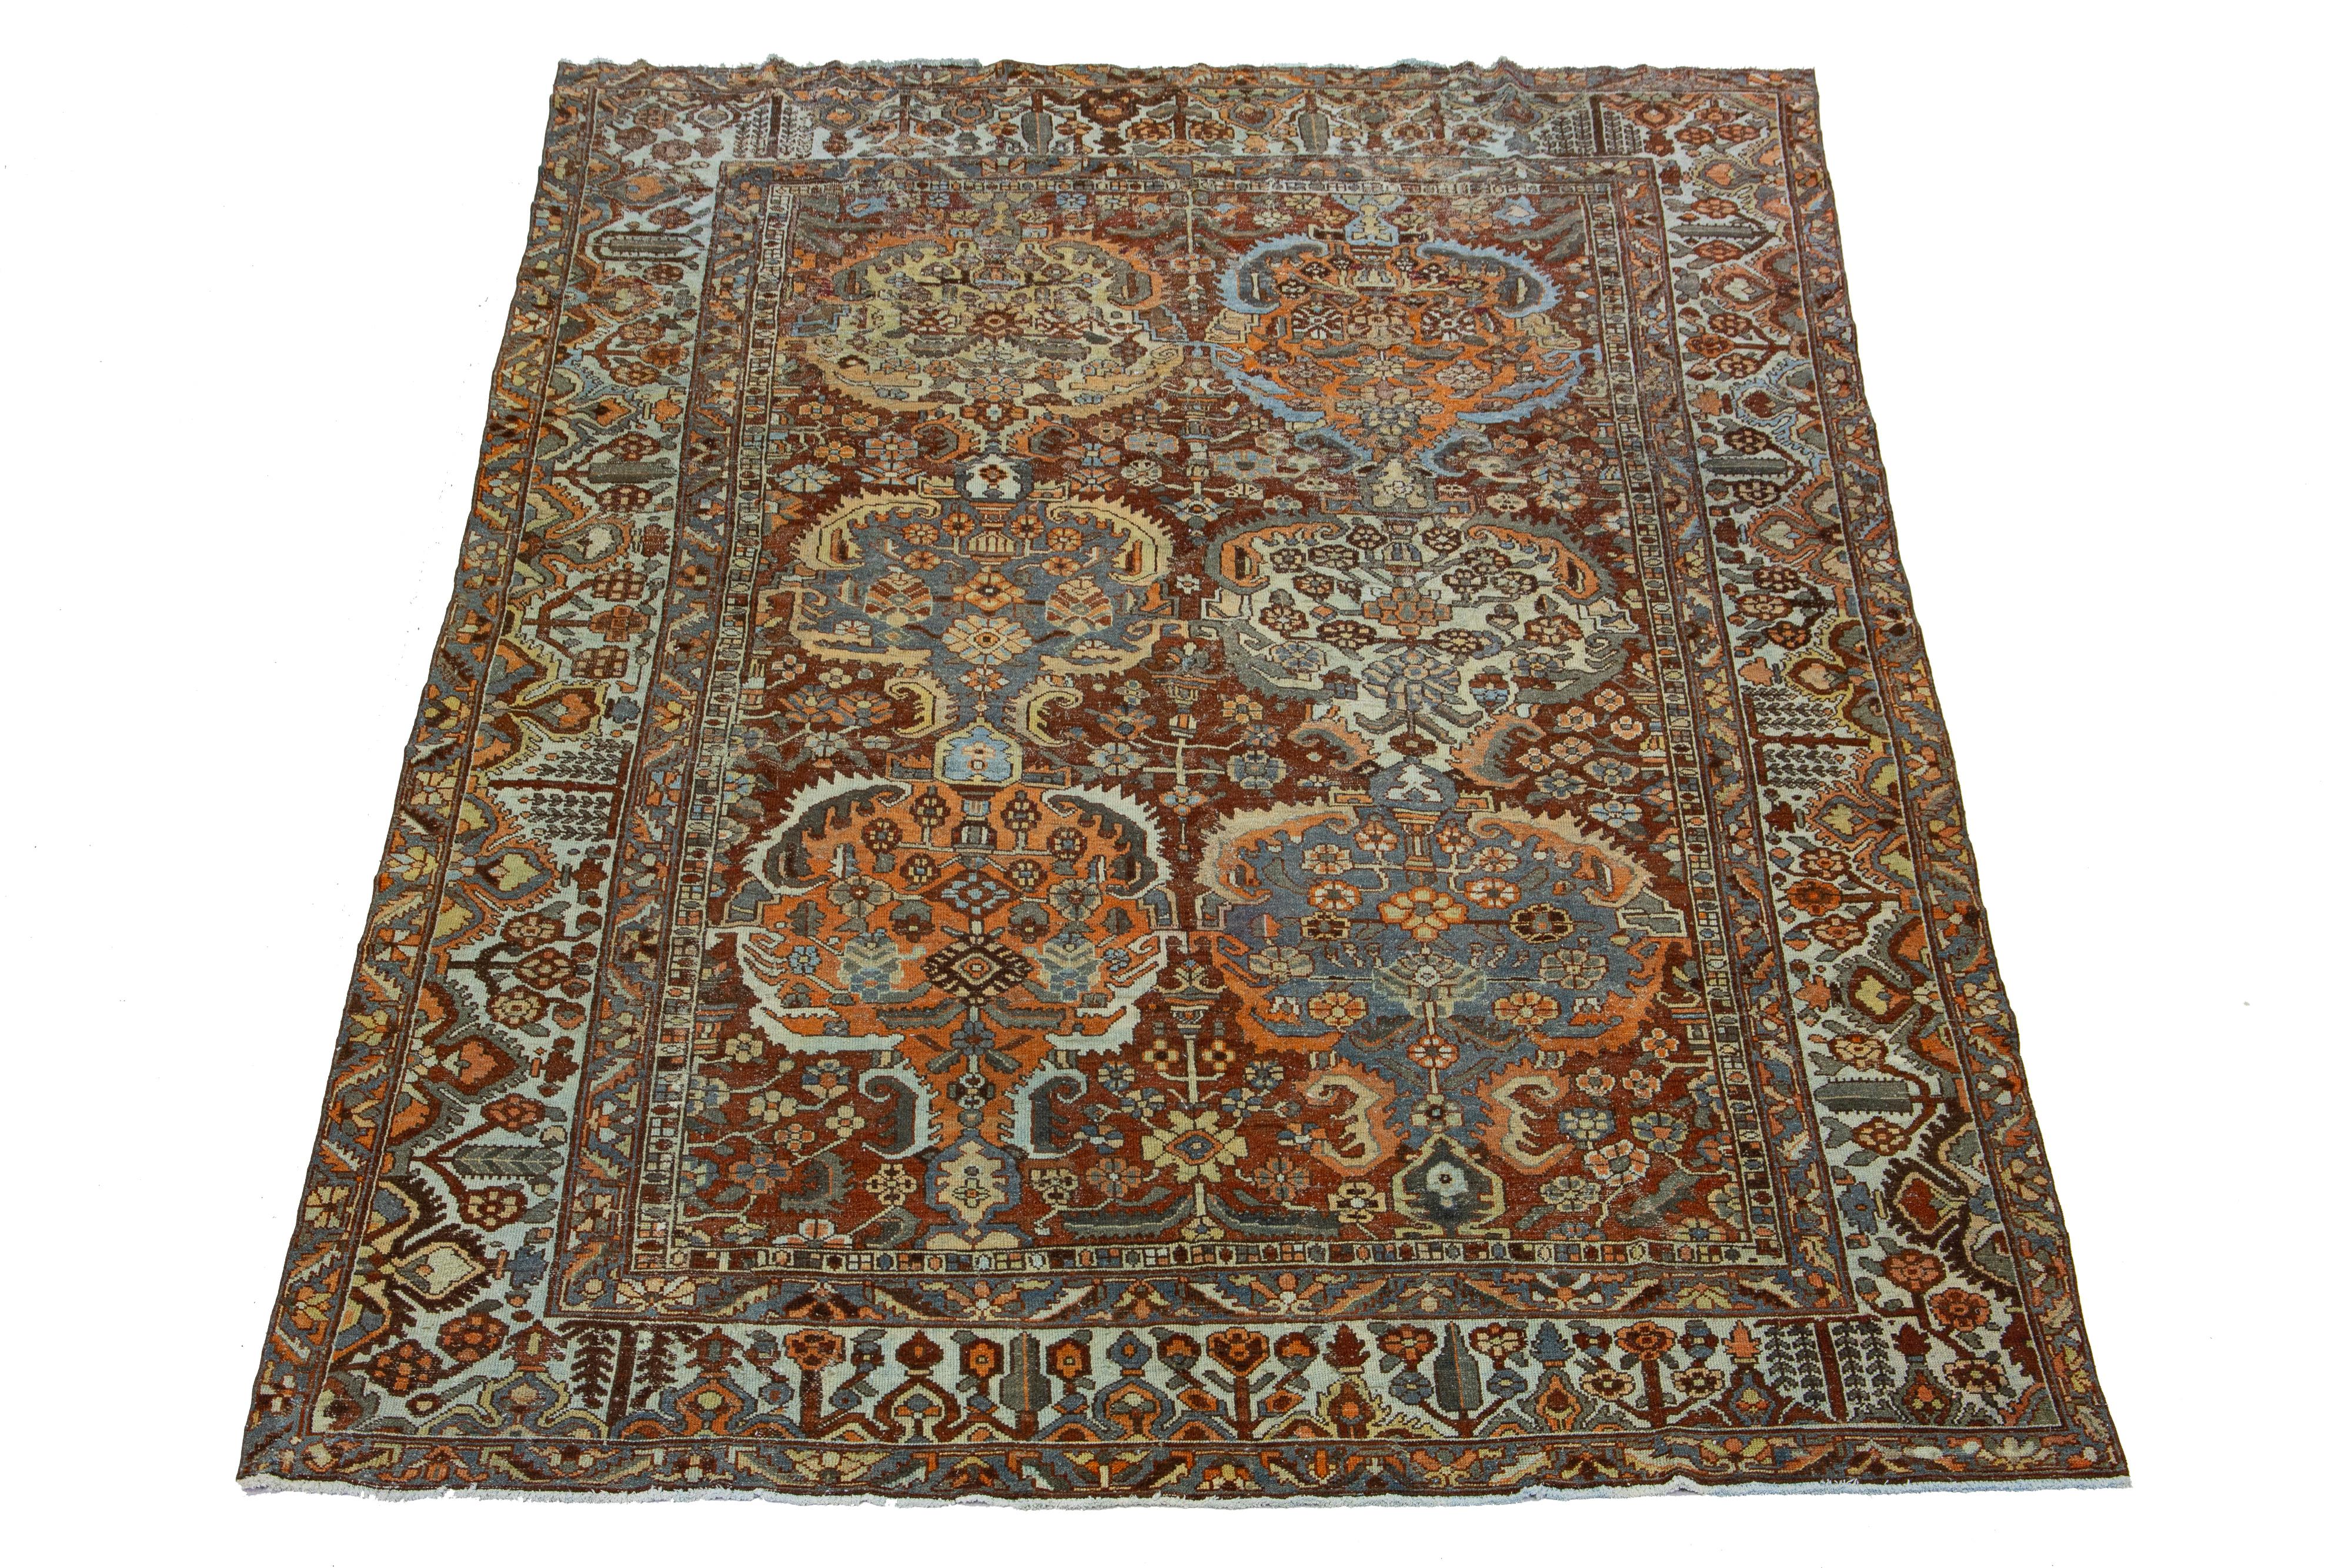 Beautiful Antique Bakhtiari hand-knotted wool rug with a red-rust color field. This Persian piece has a classic geometric floral design in blue, orange, and peach colors.

This rug measures 9'8